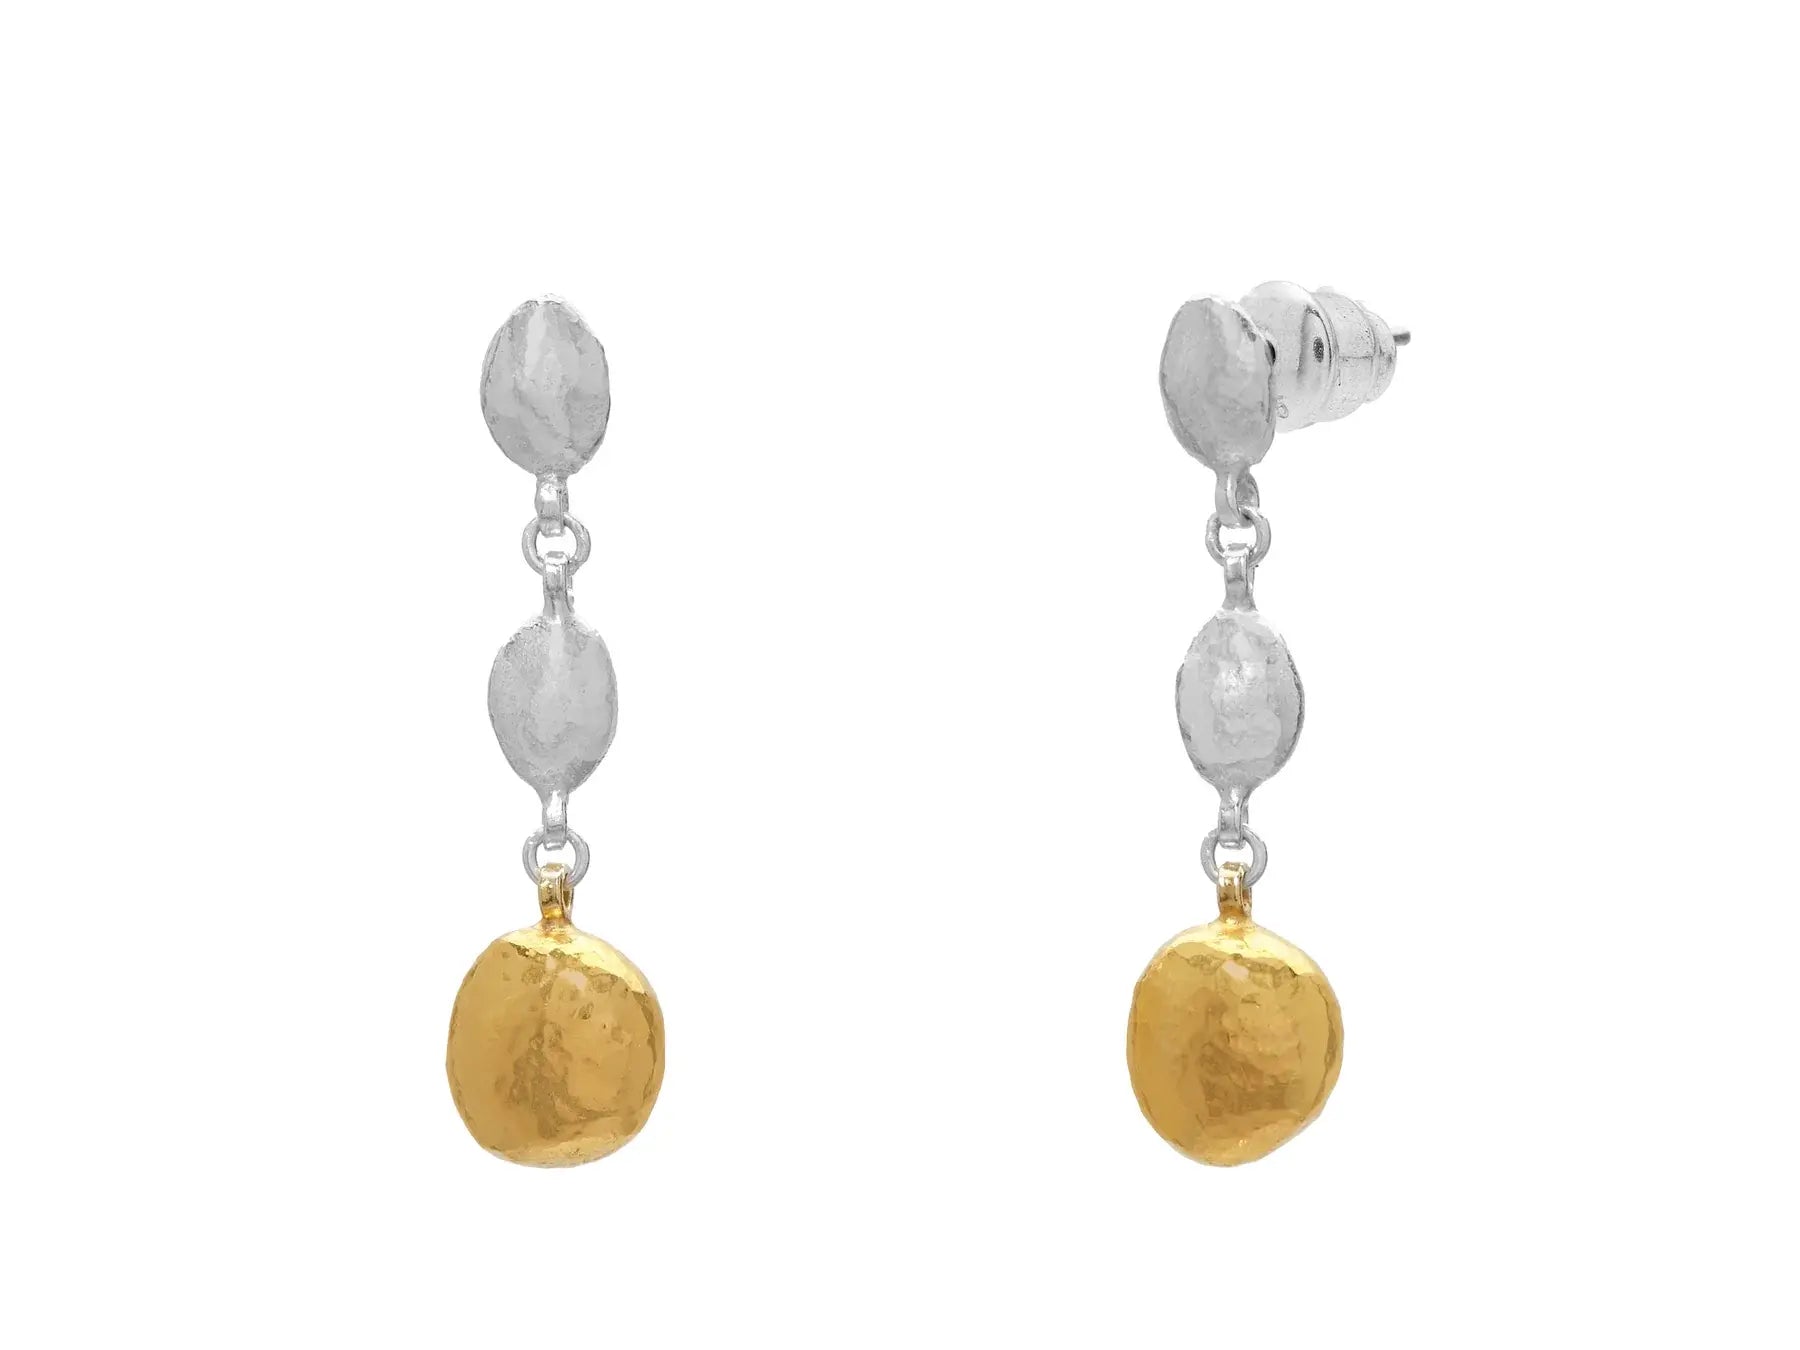 GURHAN Nugget Sterling Silver Drop Earrings, with No Stone &amp; Gold Accents - Squash Blossom Vail